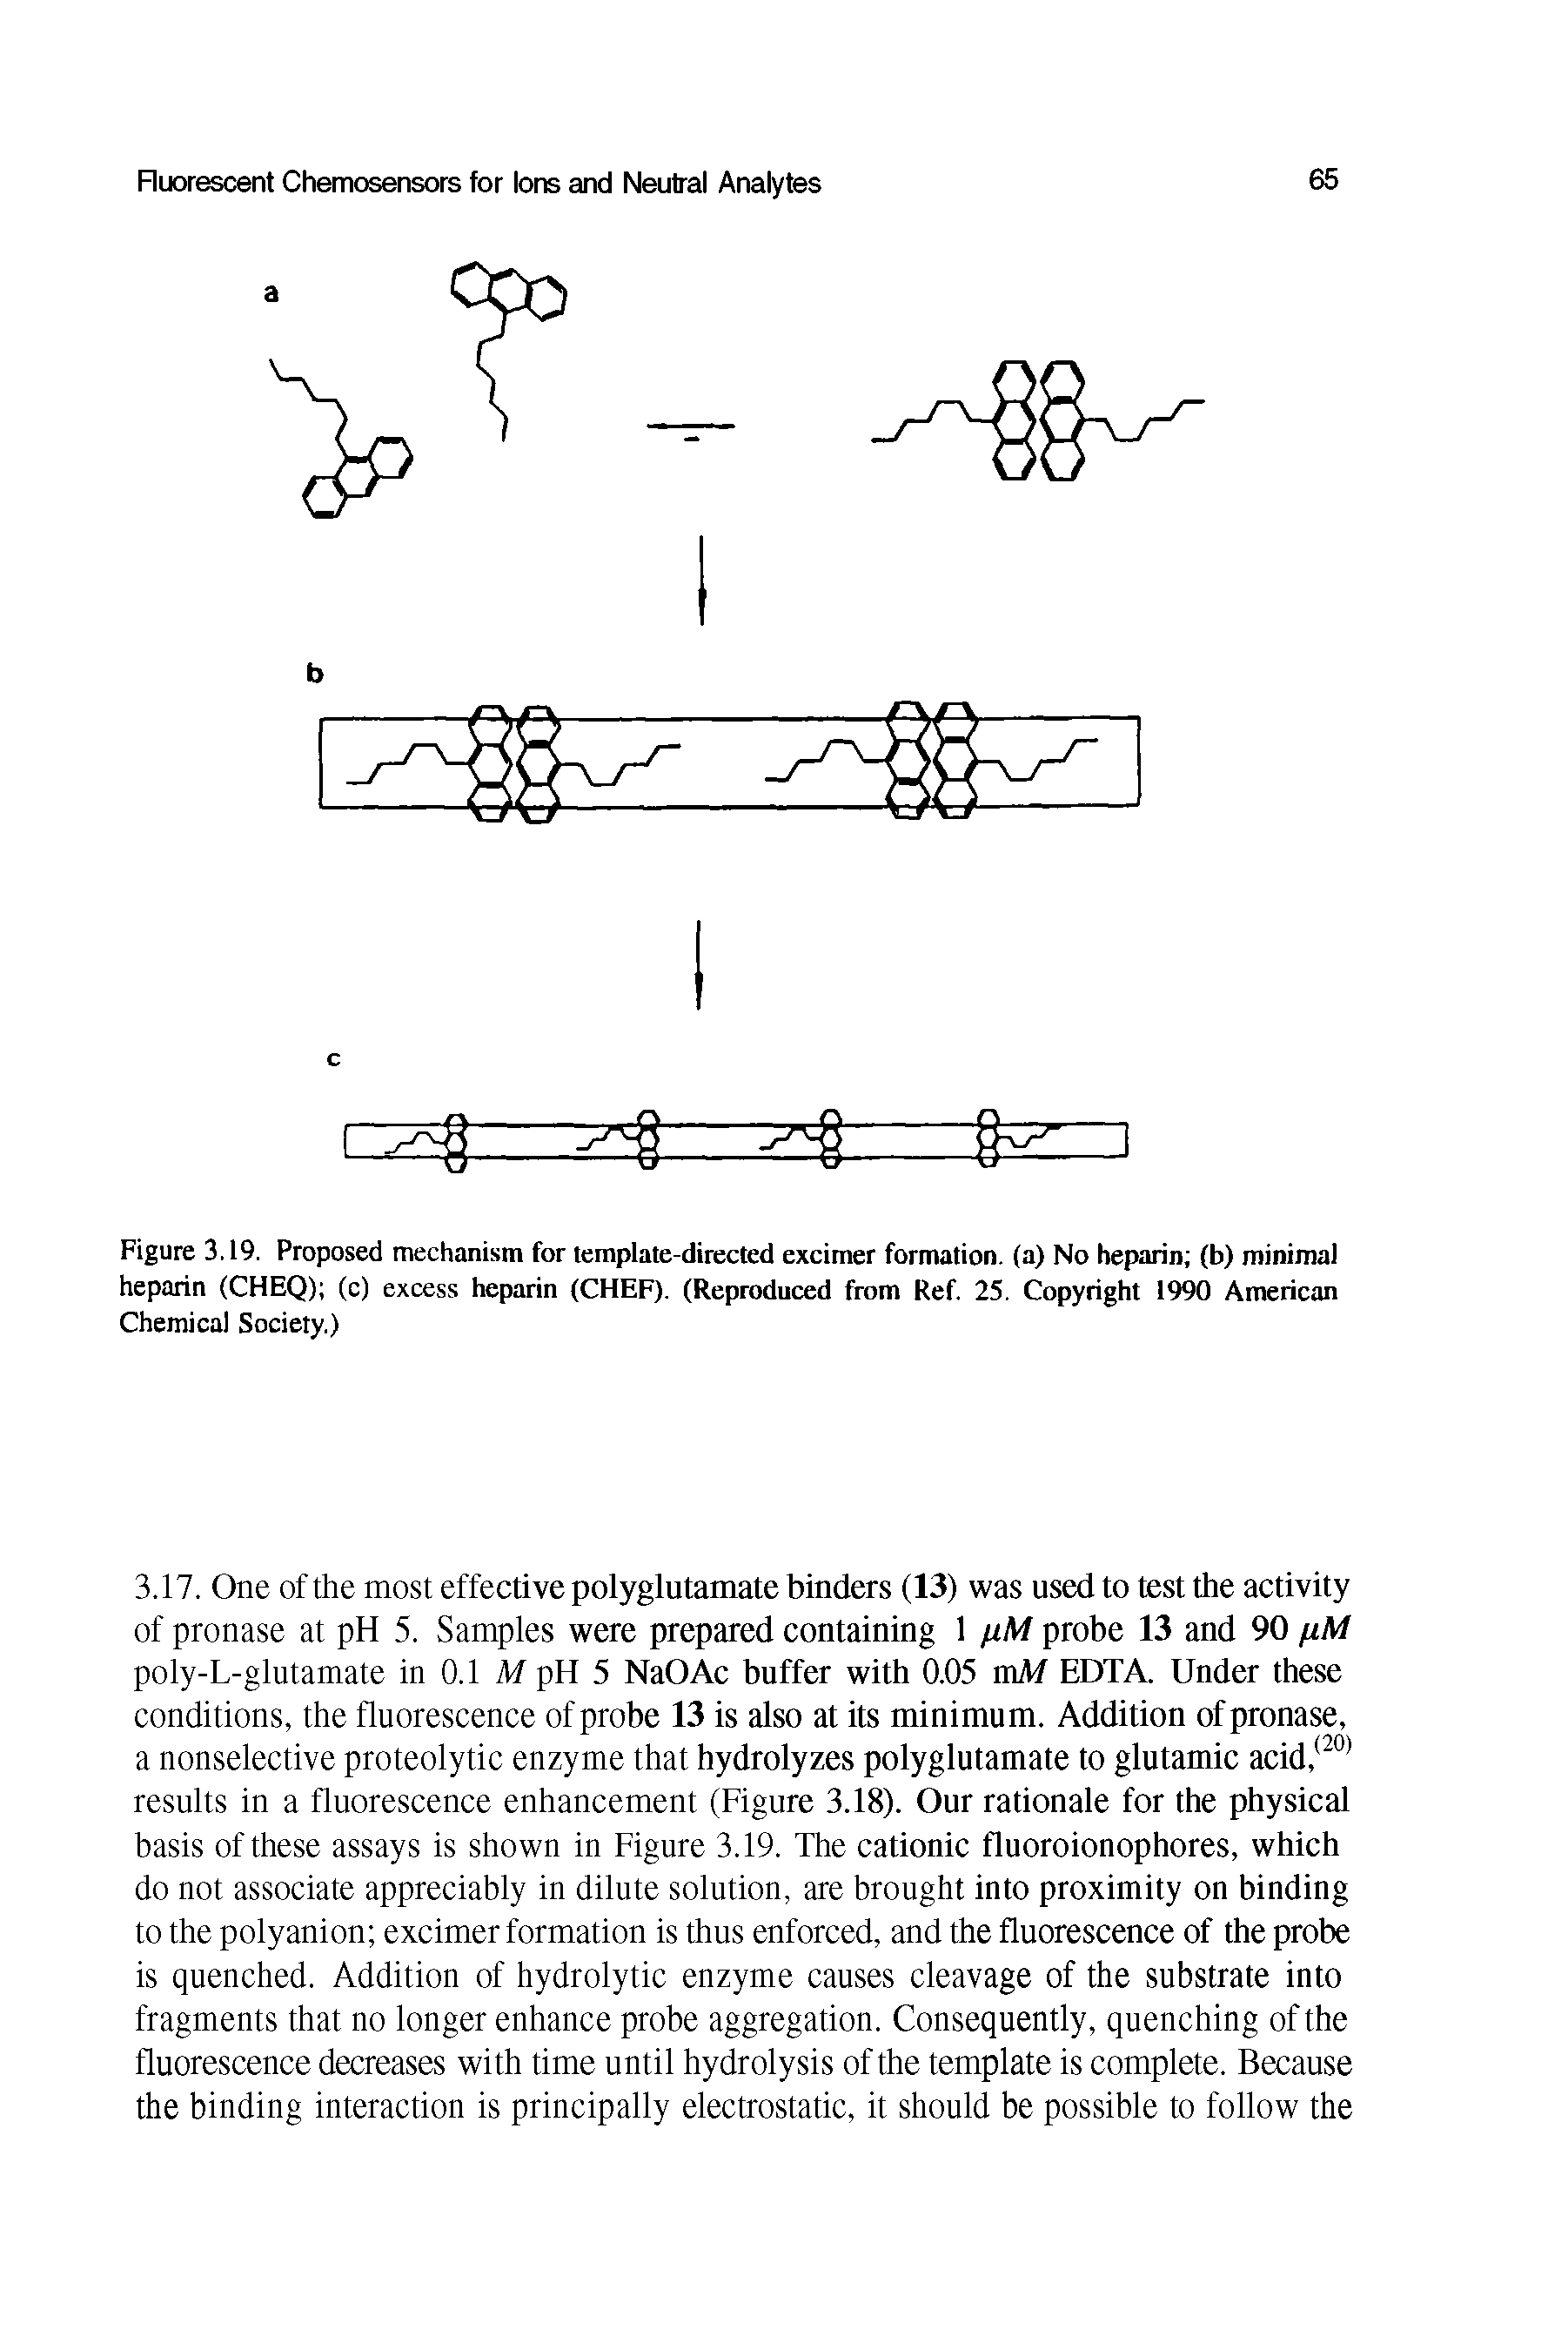 Figure 3.19. Proposed mechanism for template-directed excimer formation, (a) No heparin (b) minimal heparin (CHEQ) (c) excess heparin (CHEF). (Reproduced from Ref. 25. Copyright 1990 American Chemical Society.)...